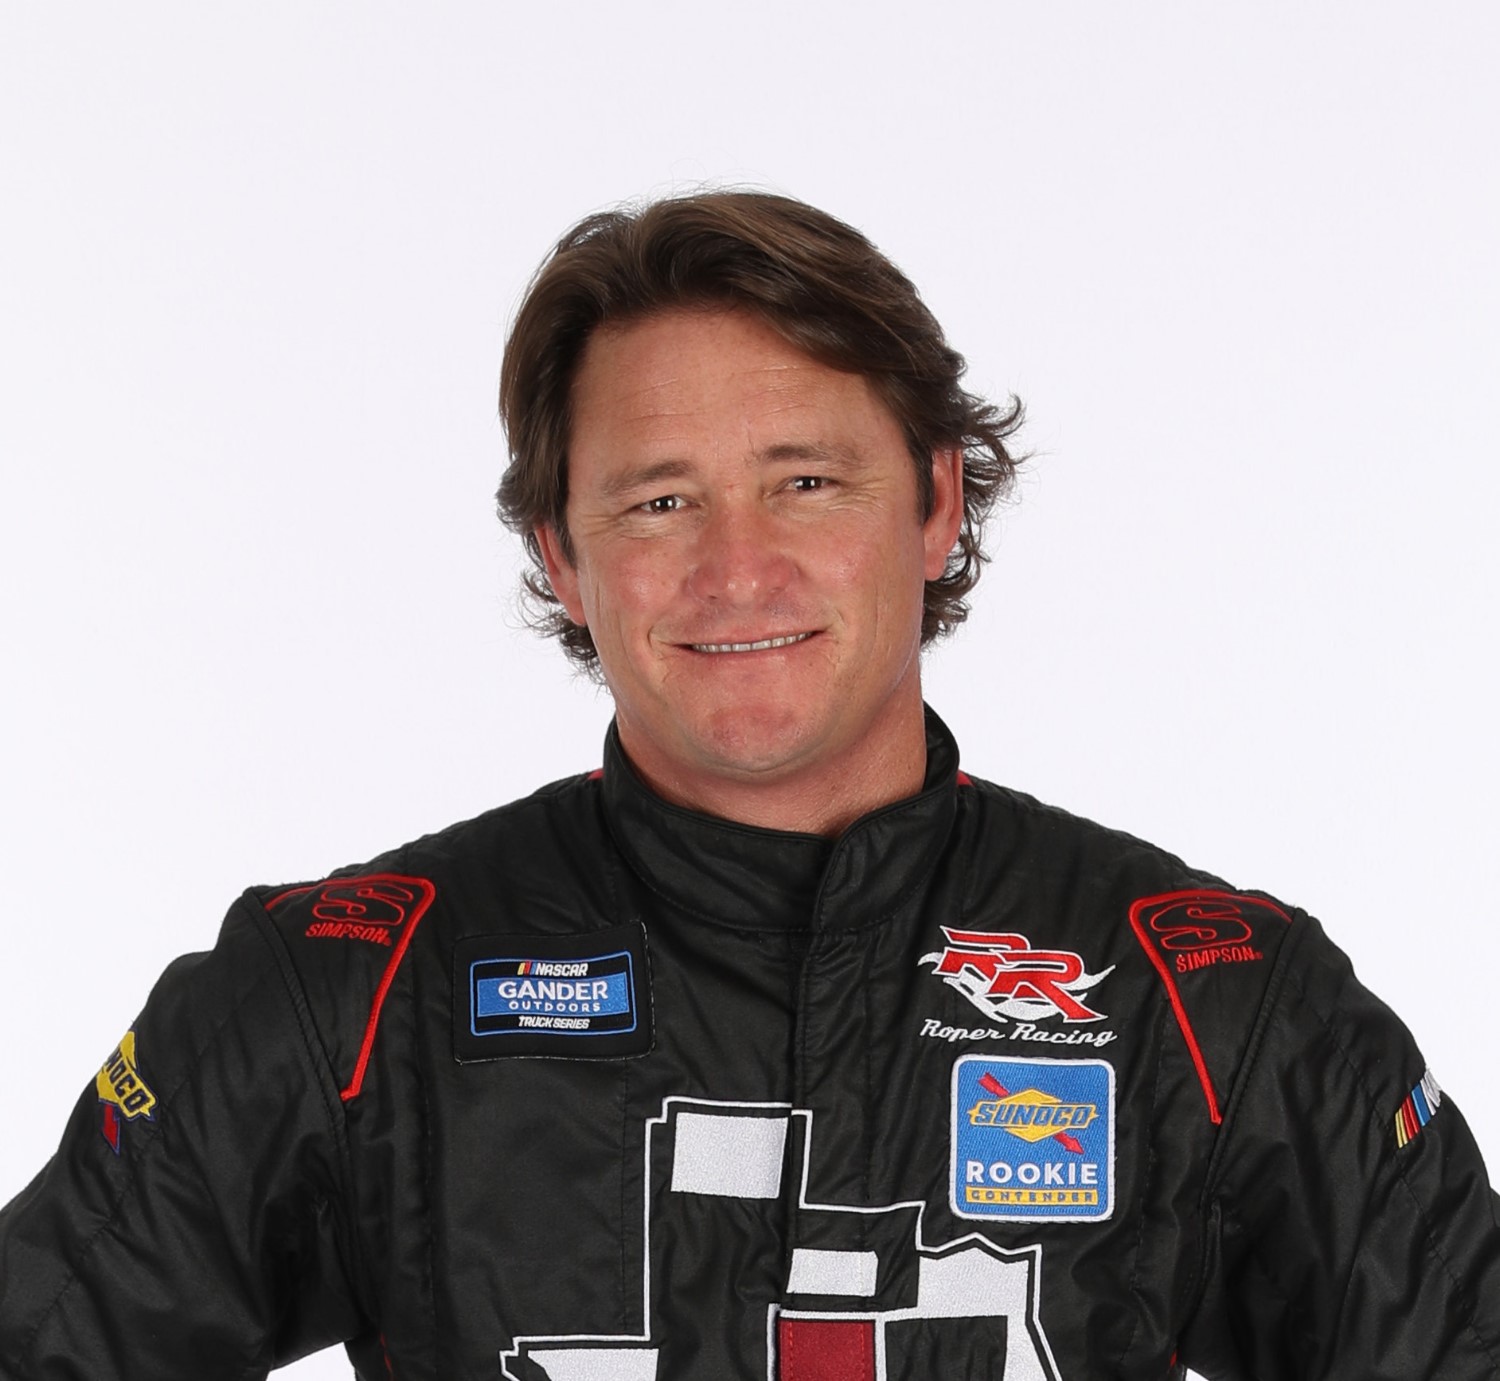 Cory Roper, a NASCAR Truck Series driver/owner, has been suspended